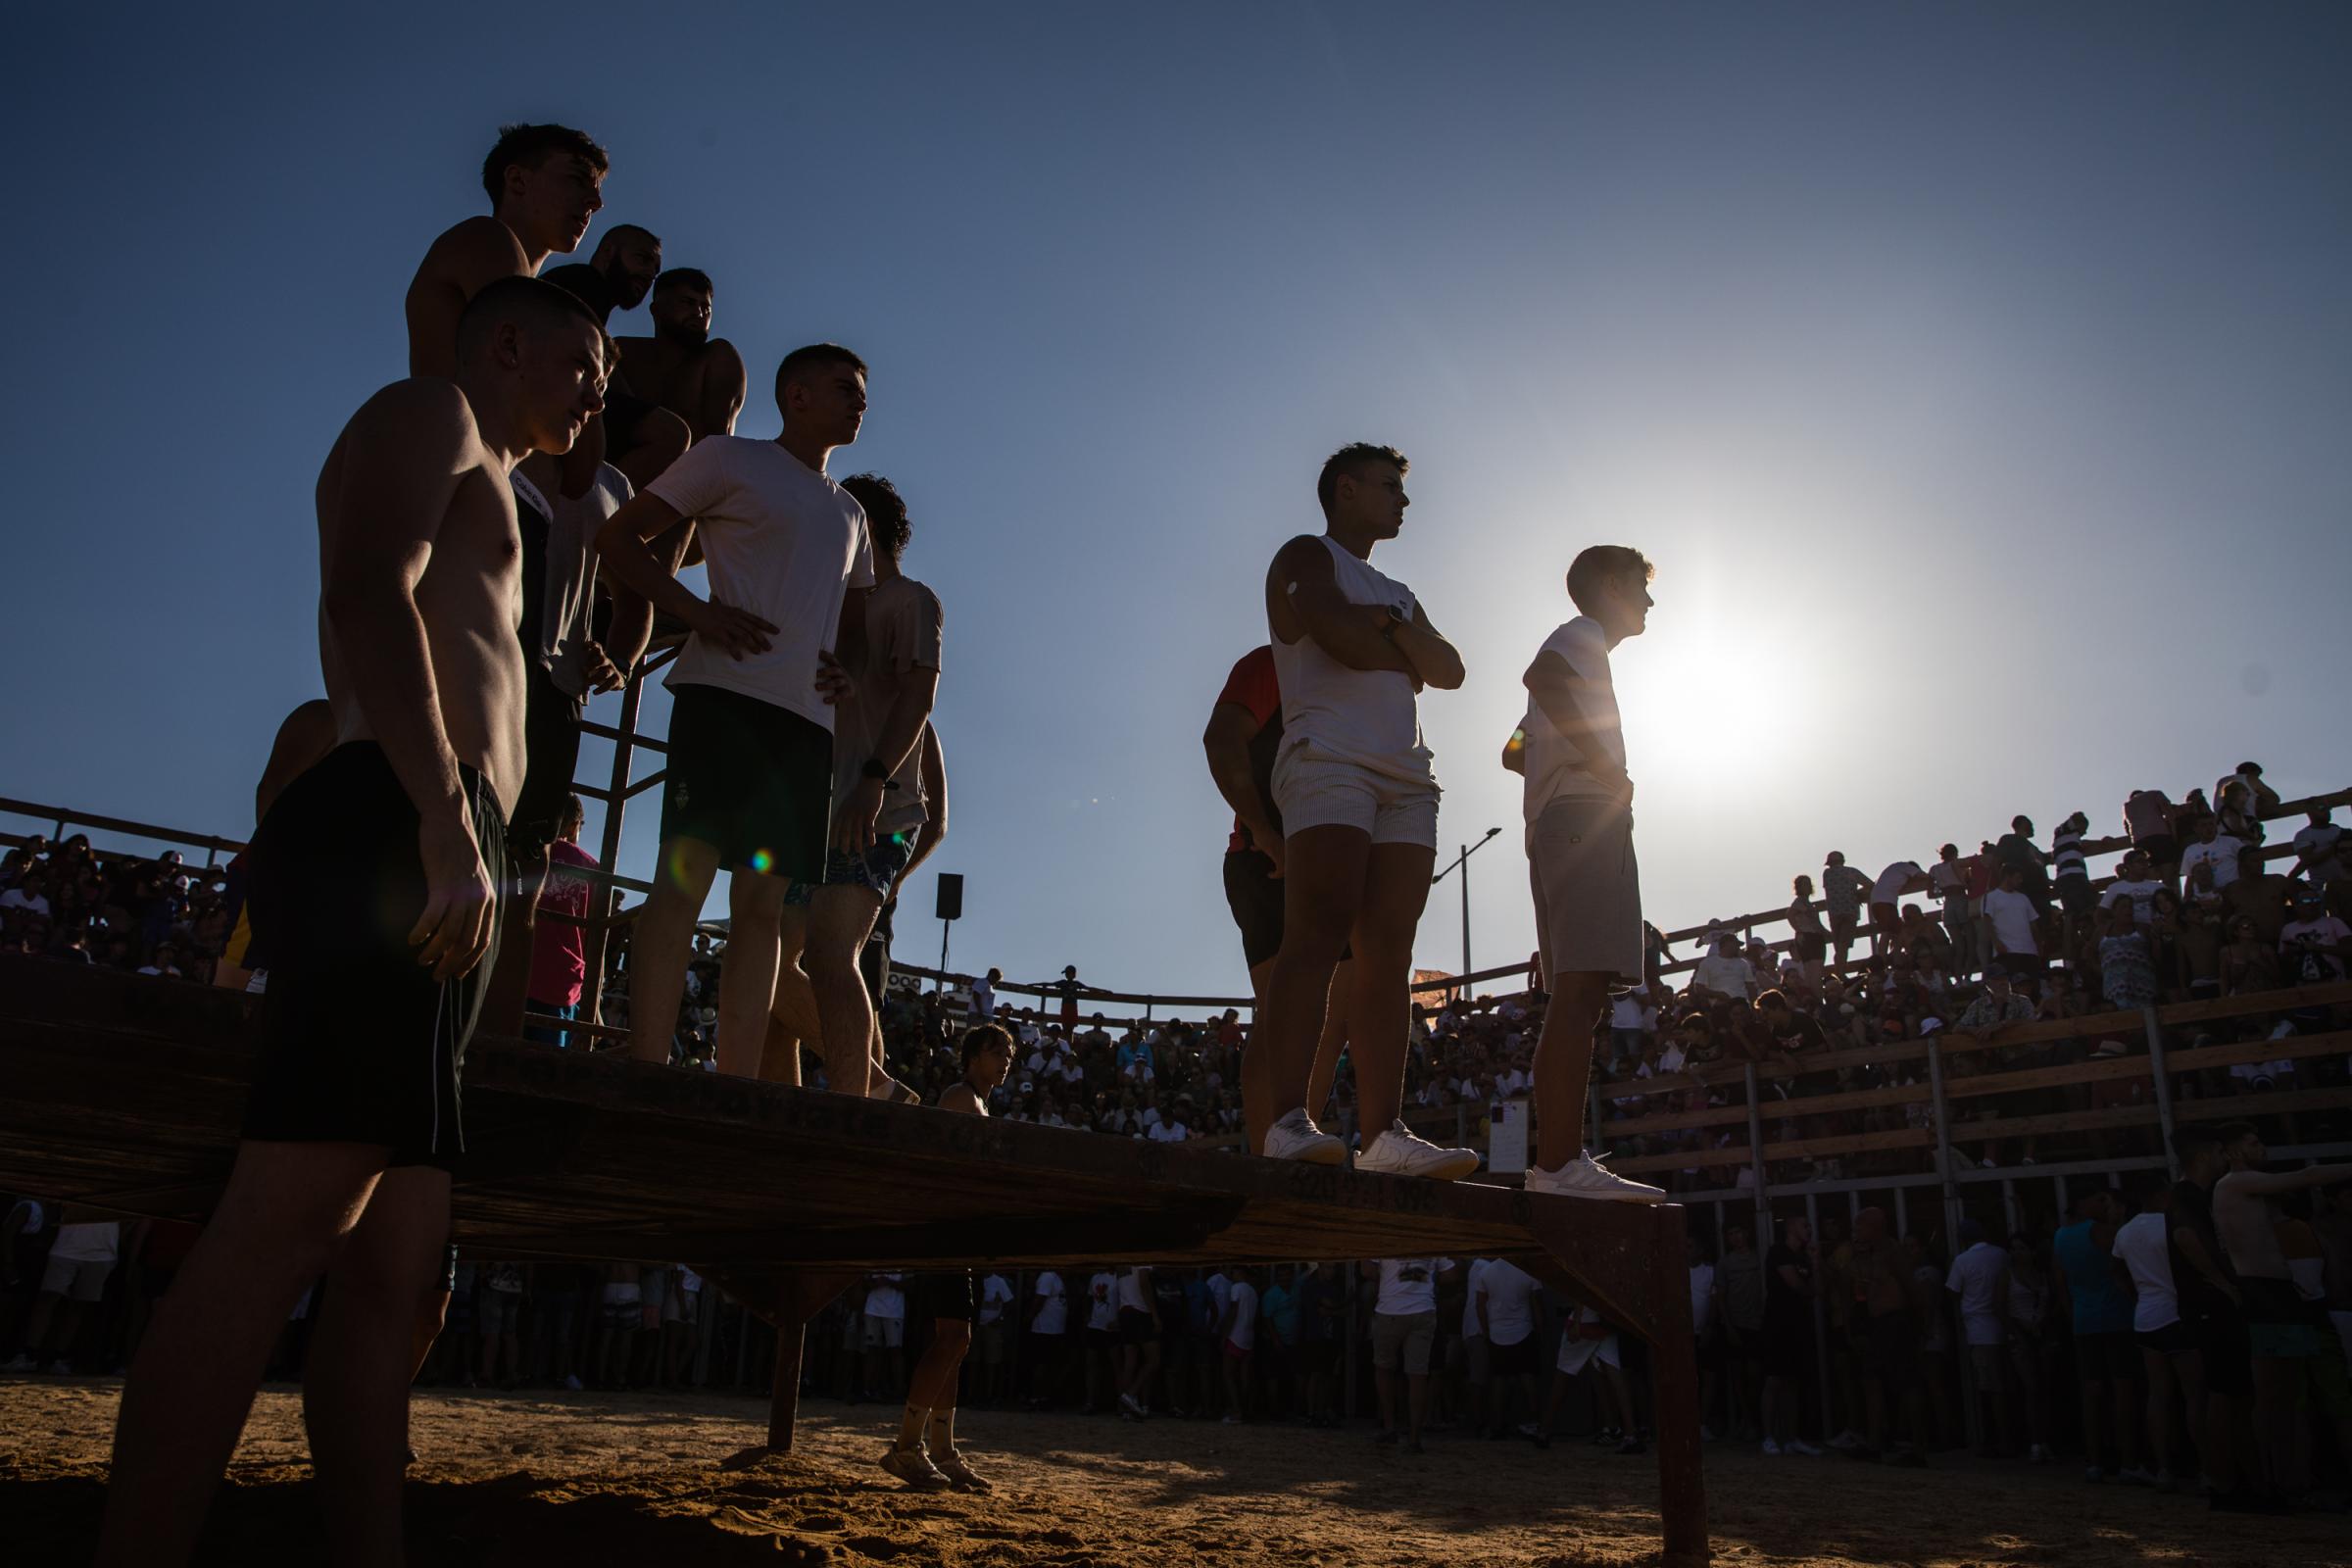 At 'Bous A La Mar', Revelers Take Plunge To Dodge Bulls And Beat The Heat - DENIA, SPAIN - JULY 17: Participants waiting for a bull...